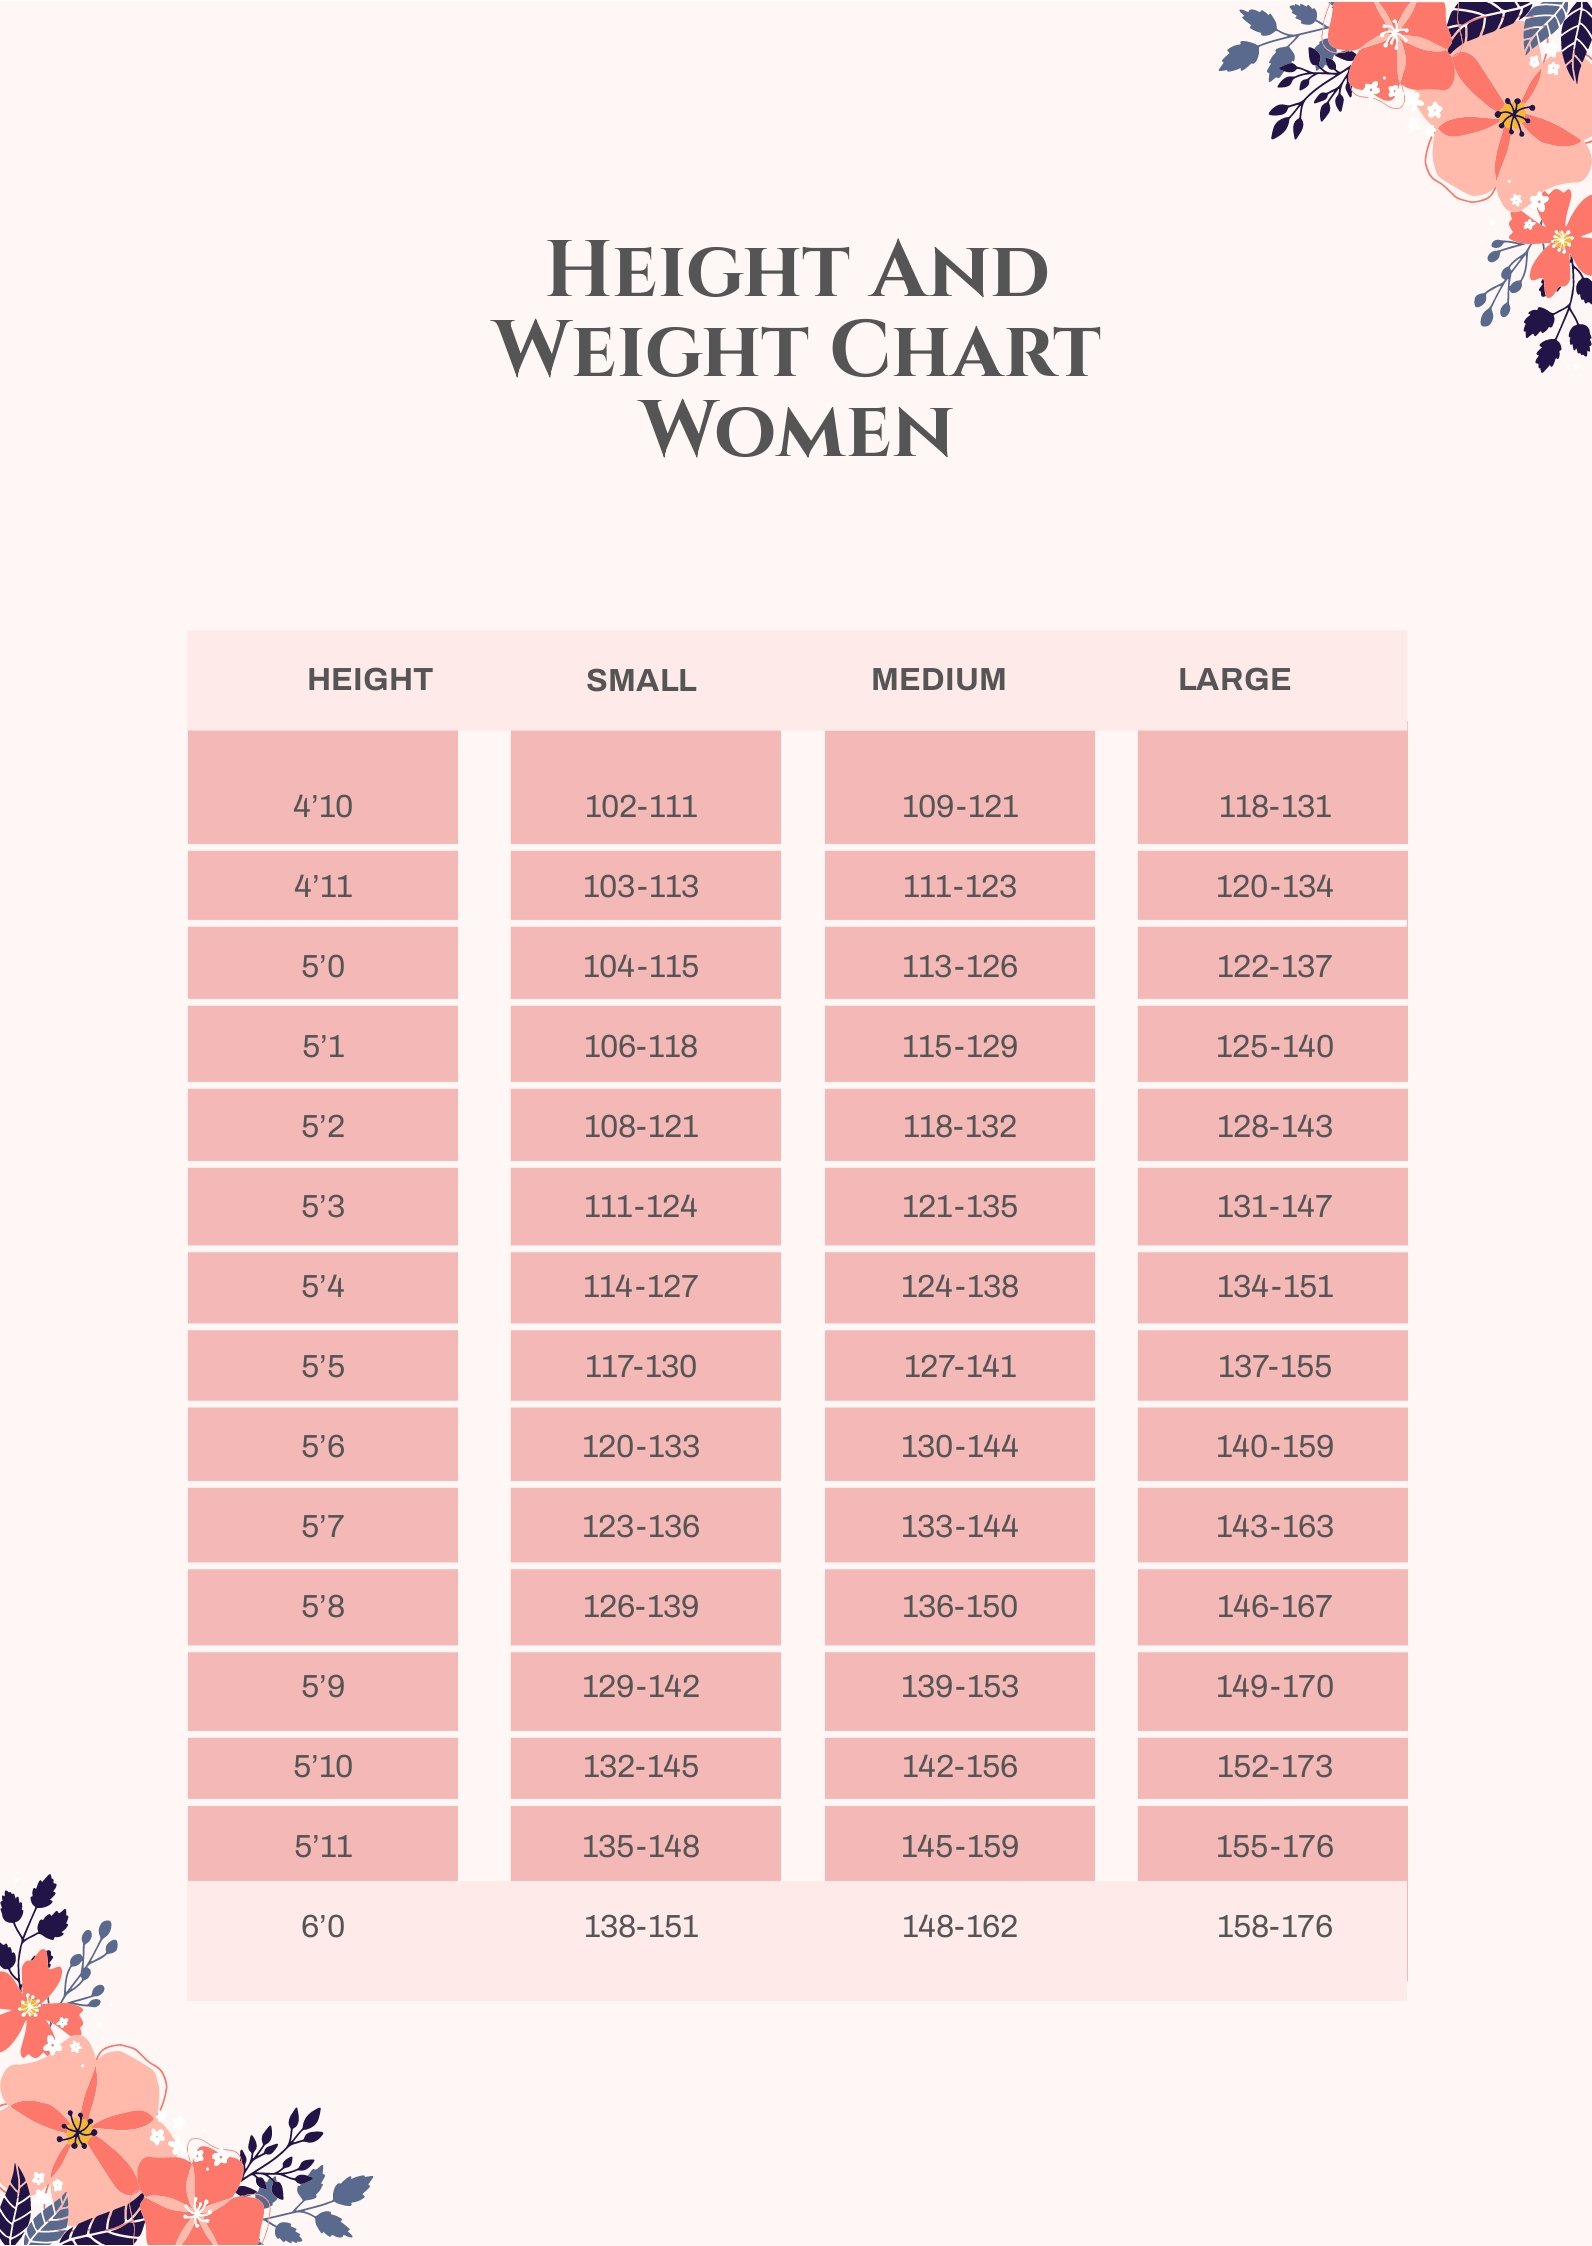 Height and Weight Chart Women